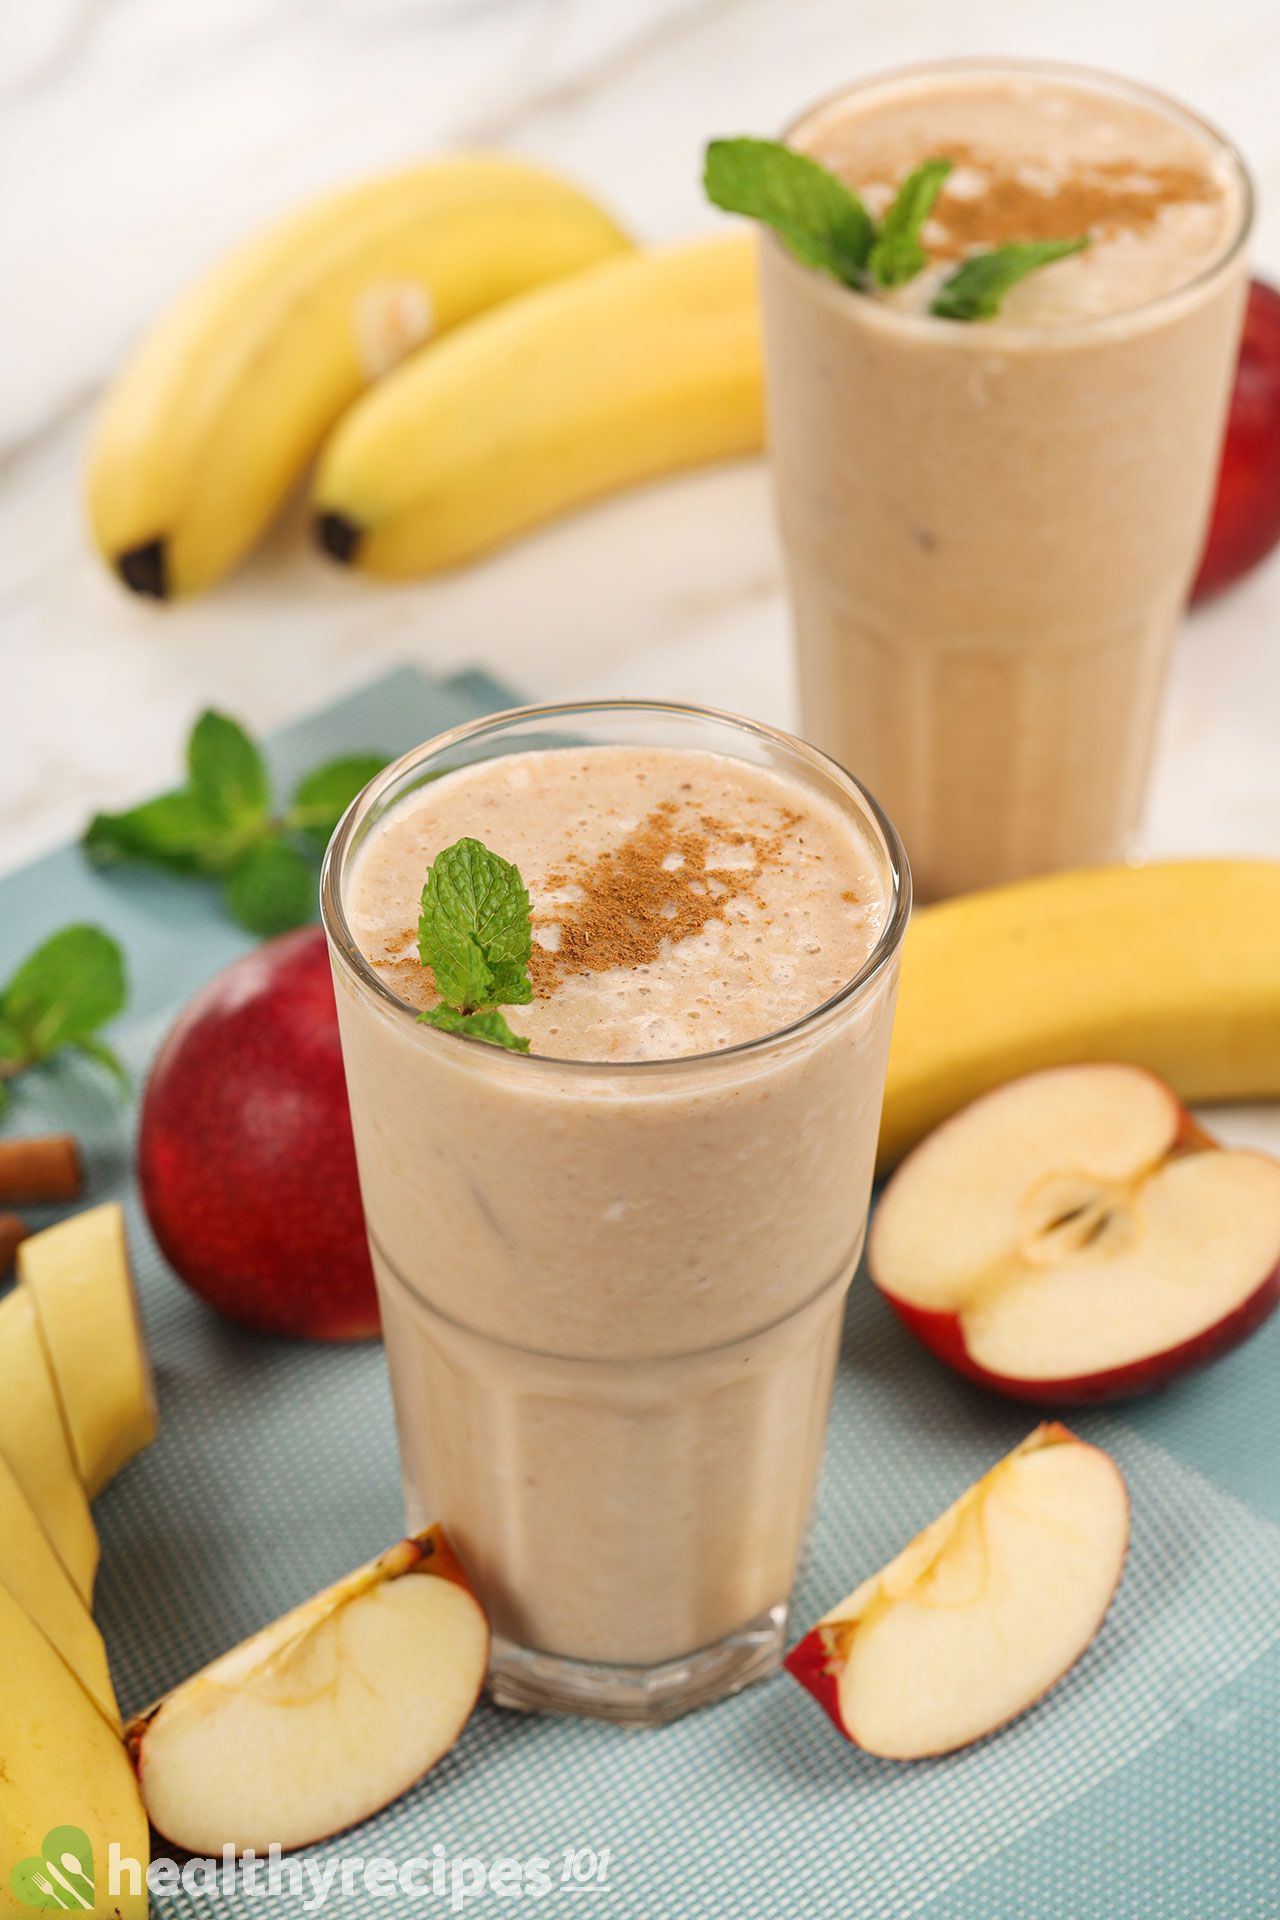 Is Our Apple Banana Smoothie Healthy